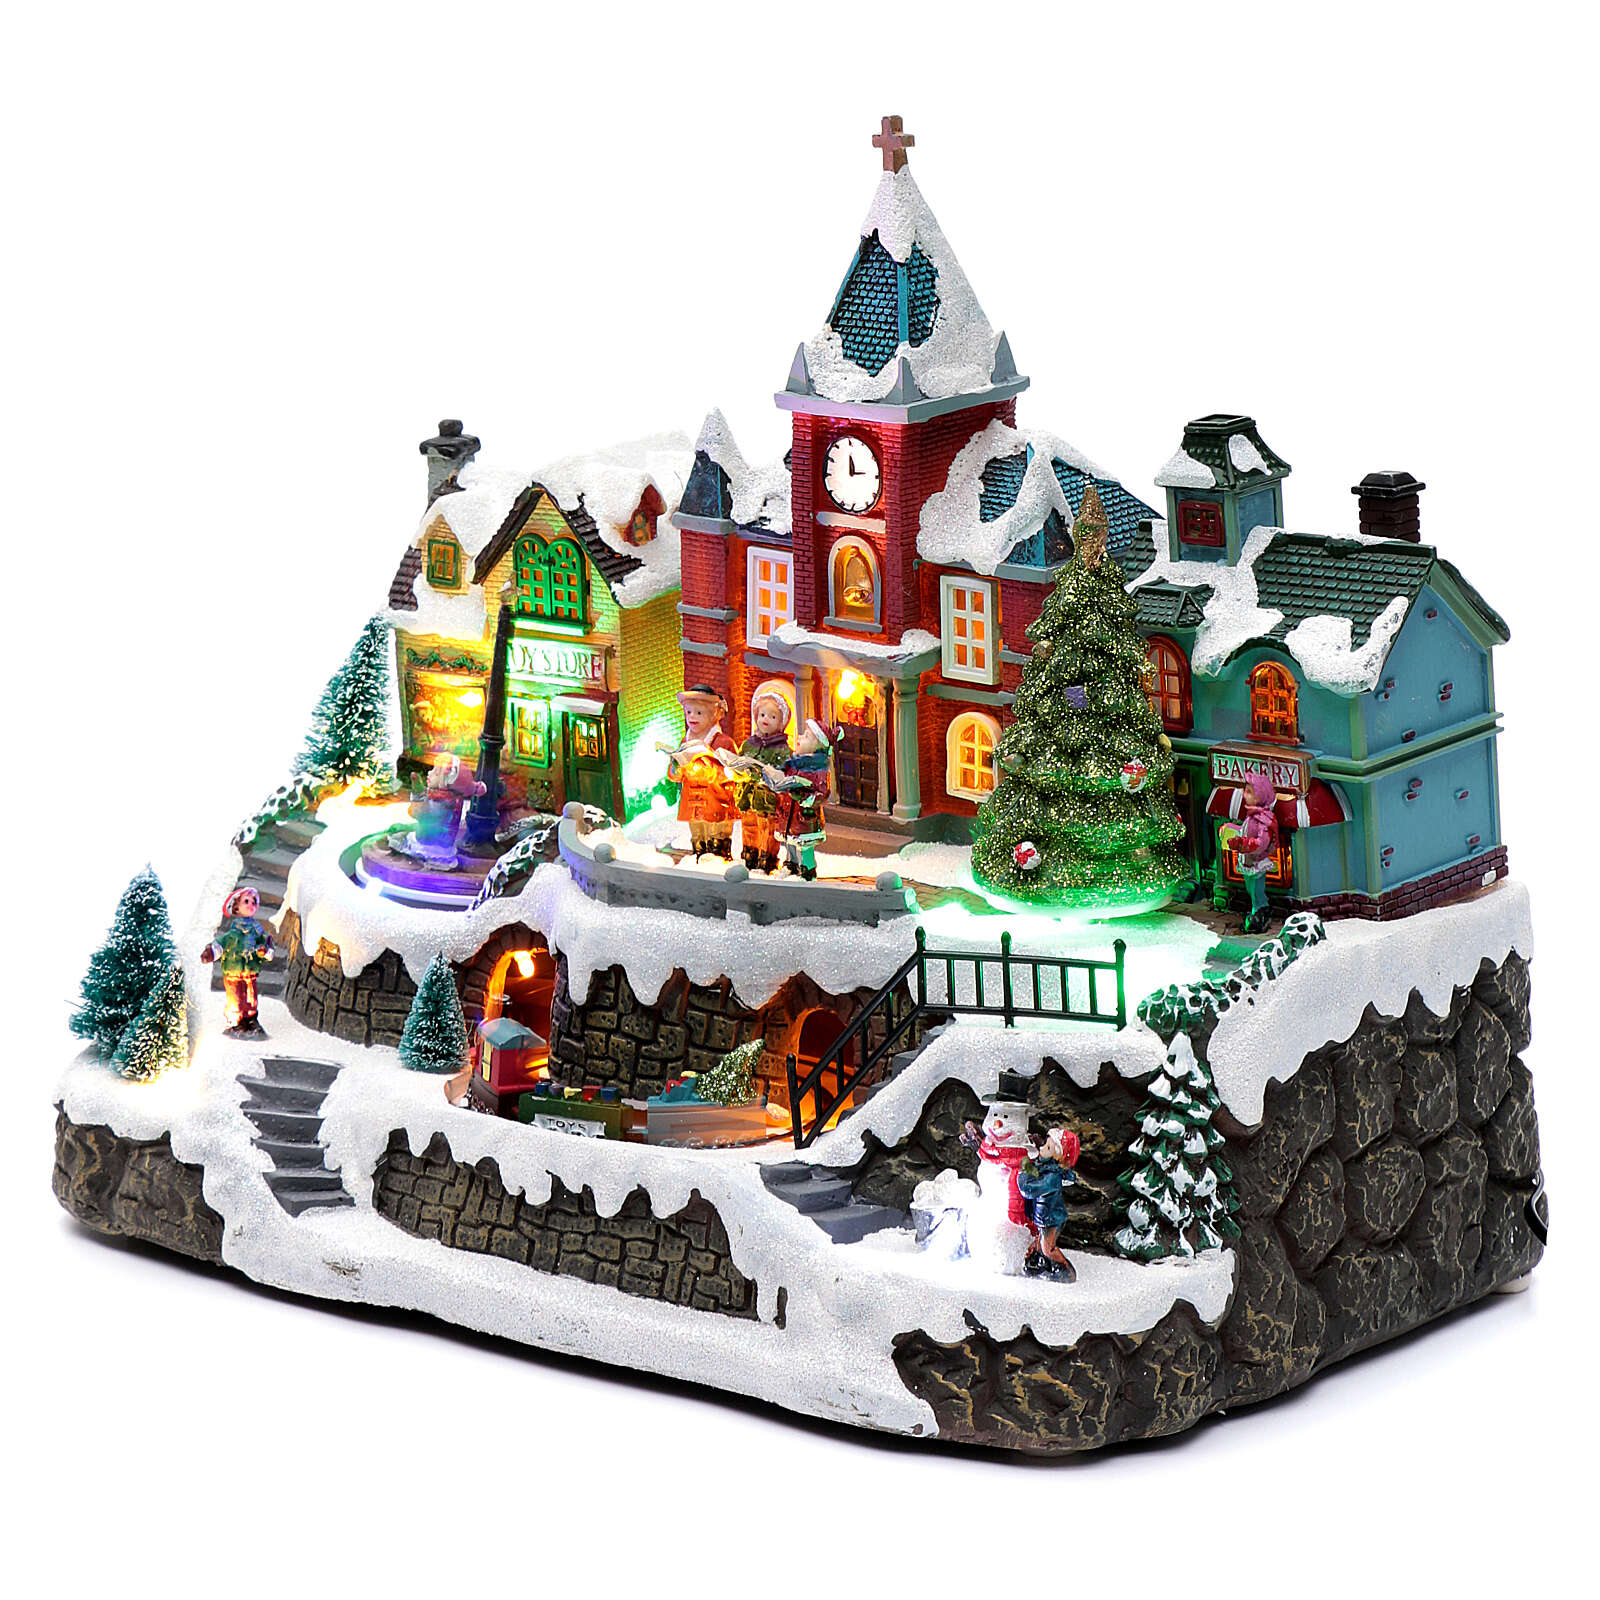 LIghted Christmas village with rotating train, fountain and online